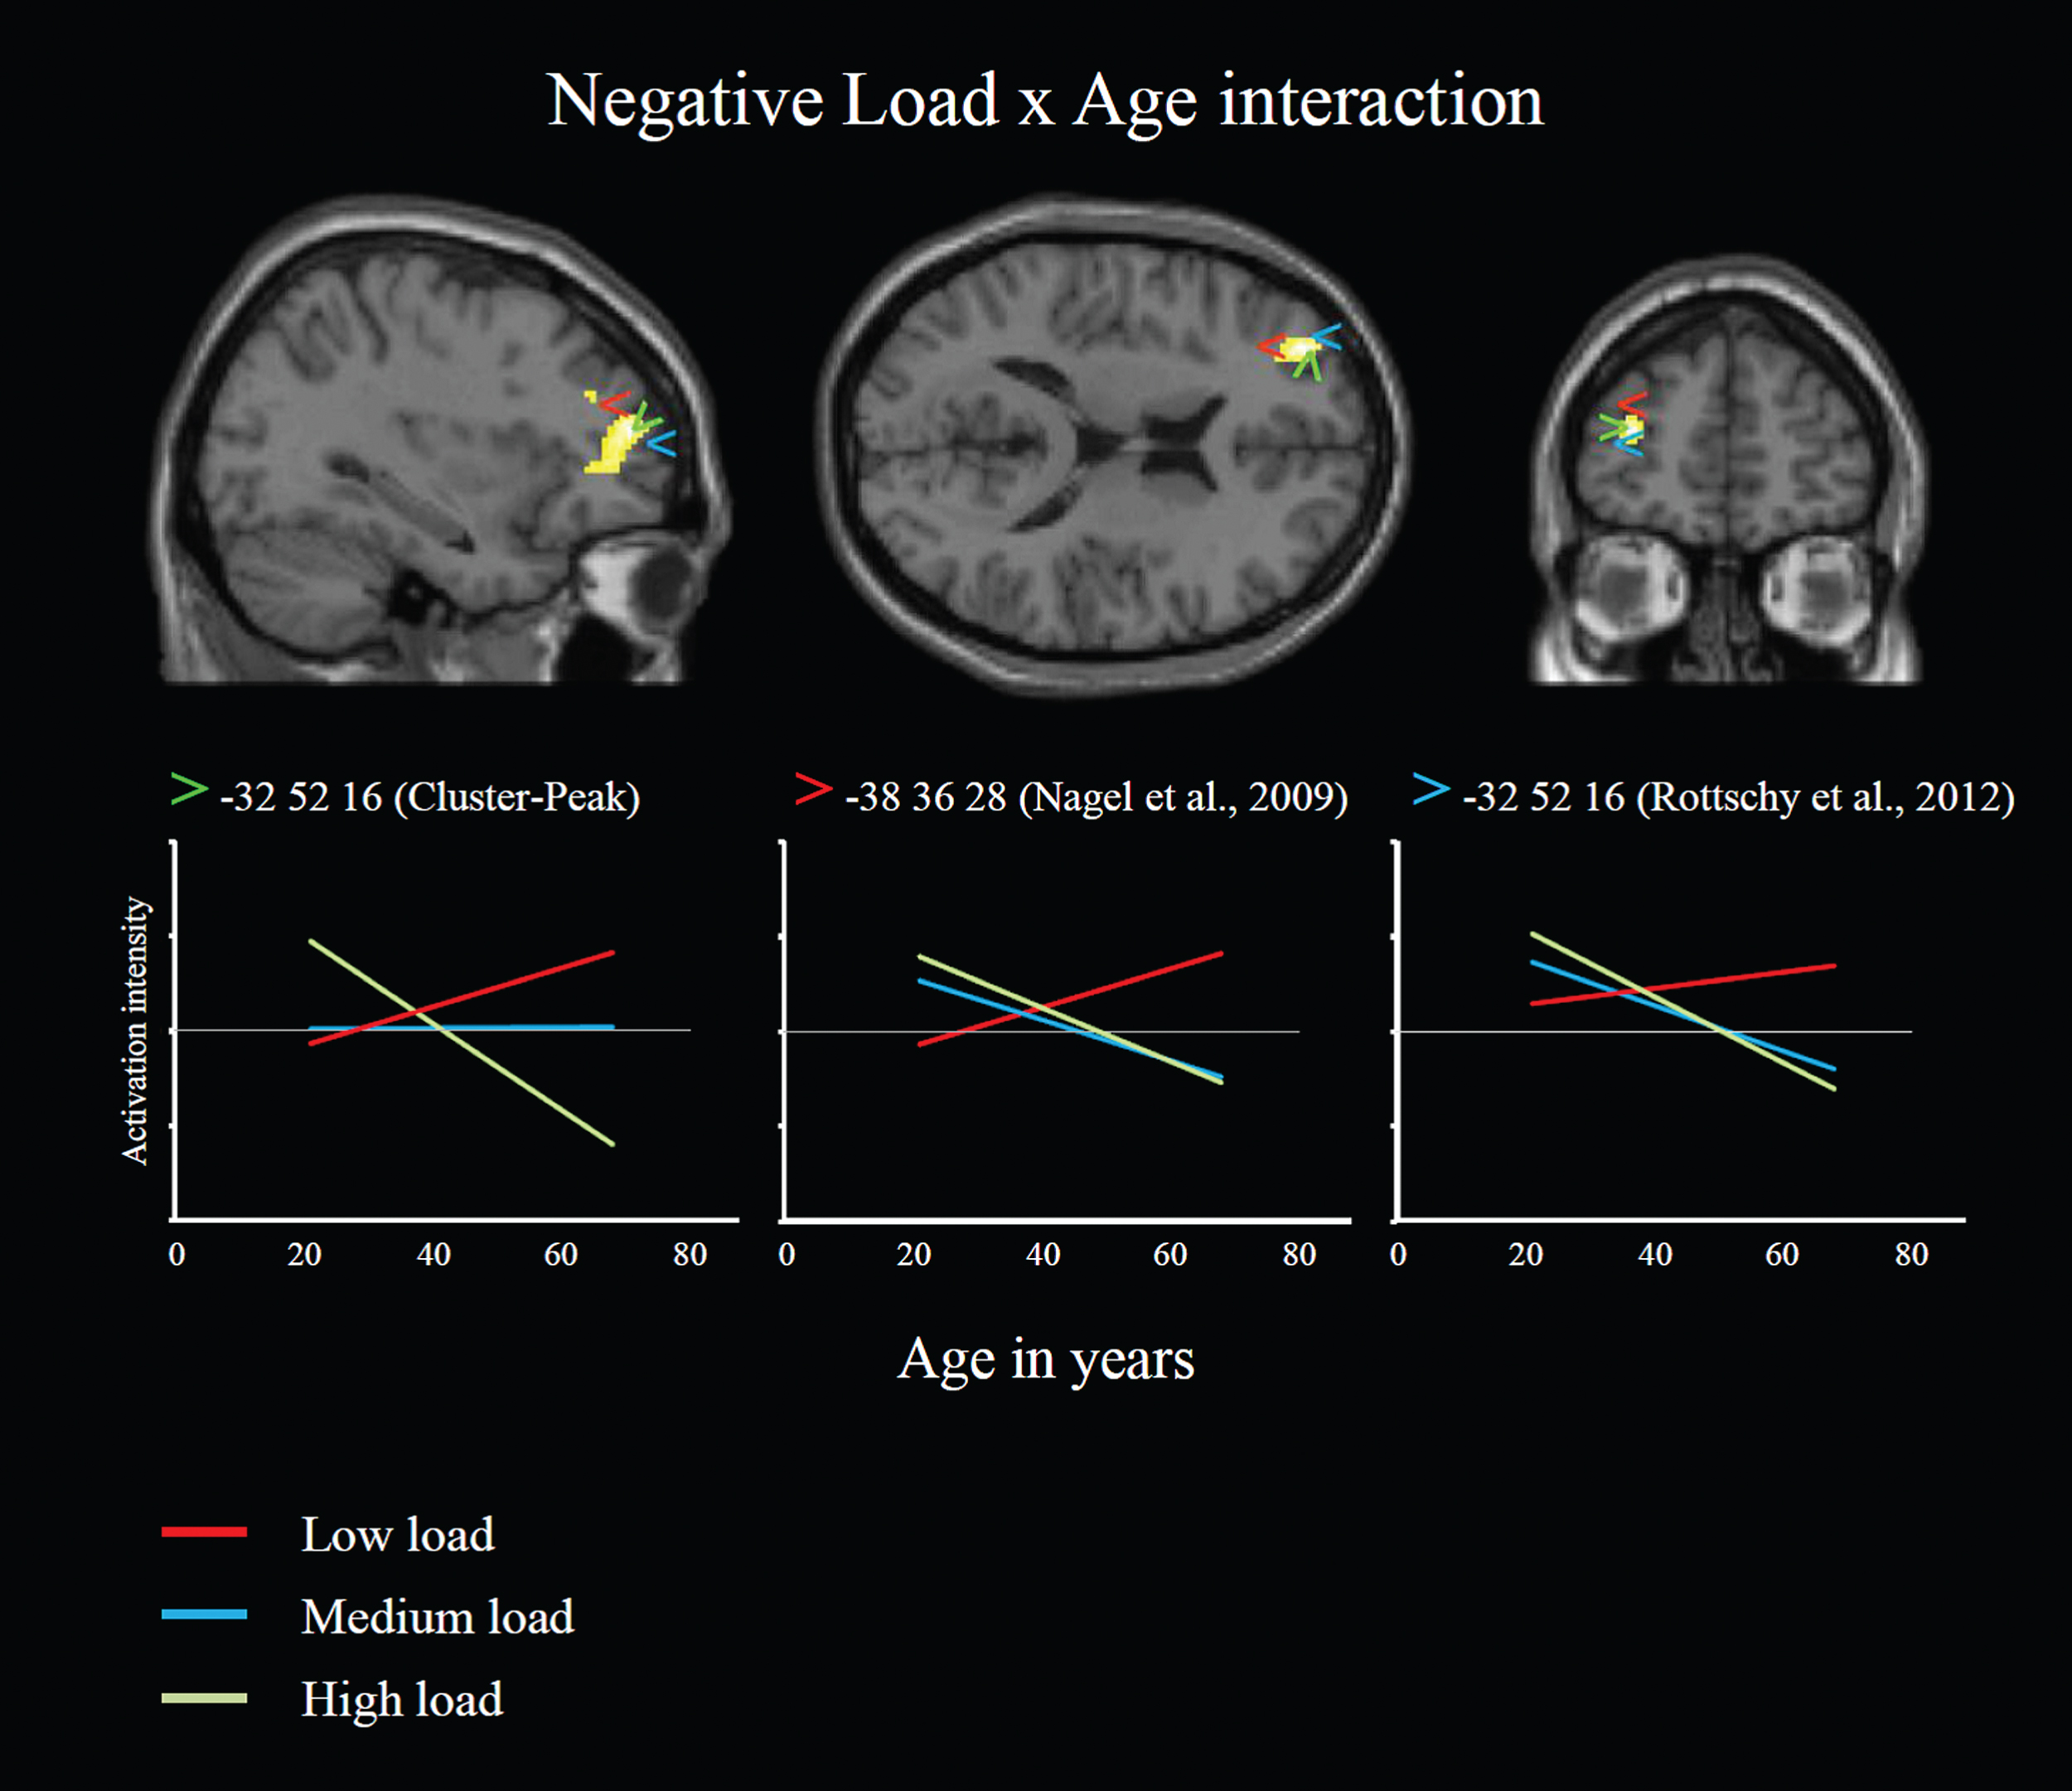 The CRUNCH effect. Whole-brain cluster-level analysis with a threshold of Z > 3.1 and a cluster significance threshold of pFWE < 0.05 revealed a negative load×age interaction within a large cluster located in anterior dorsolateral prefrontal cortex (unpublished material from Toepper et al. [85]). The diagrams illustrate activation intensity at low, medium, and high task load dependent from age within the peak of this cluster and two study-independent peaks identified by conjunction analyses across different age groups and load levels [69] and across 124 verbal and nonverbal working memory tasks [62]. Results showed analogue activation patterns for all three peaks indicating increasing activation intensity with advancing age at low load and decreasing activation intensity with advancing age at high load as well as higher activation intensity in older compared to younger individuals at low load and lower activation intensity in older compared to younger individuals at high load (double dissociation).